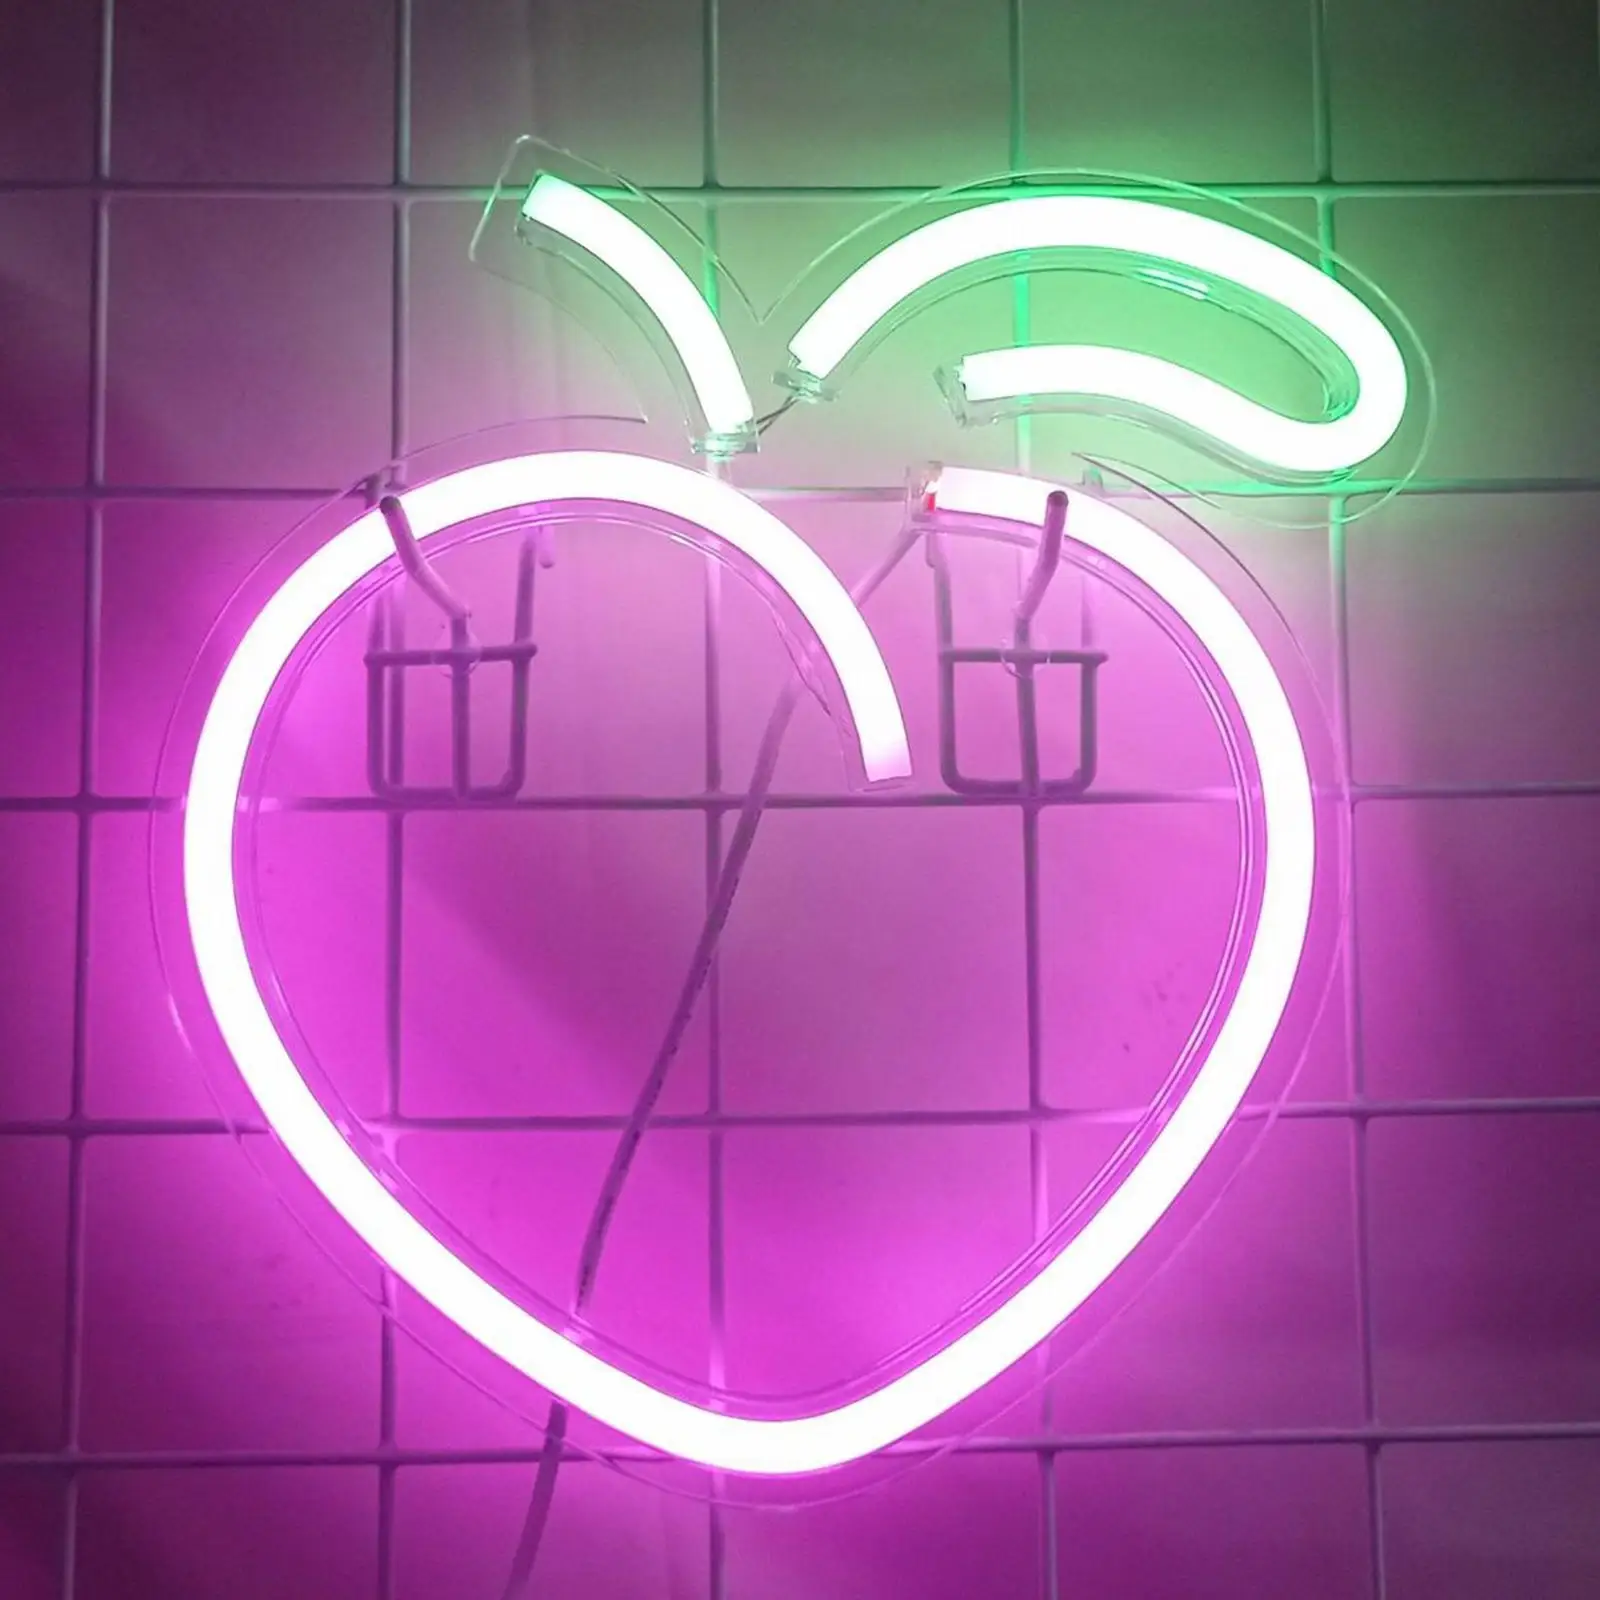 LED Peach Sign Lighting Club Outdoor Cafe Fixture Home Lamp Neon Light Decor